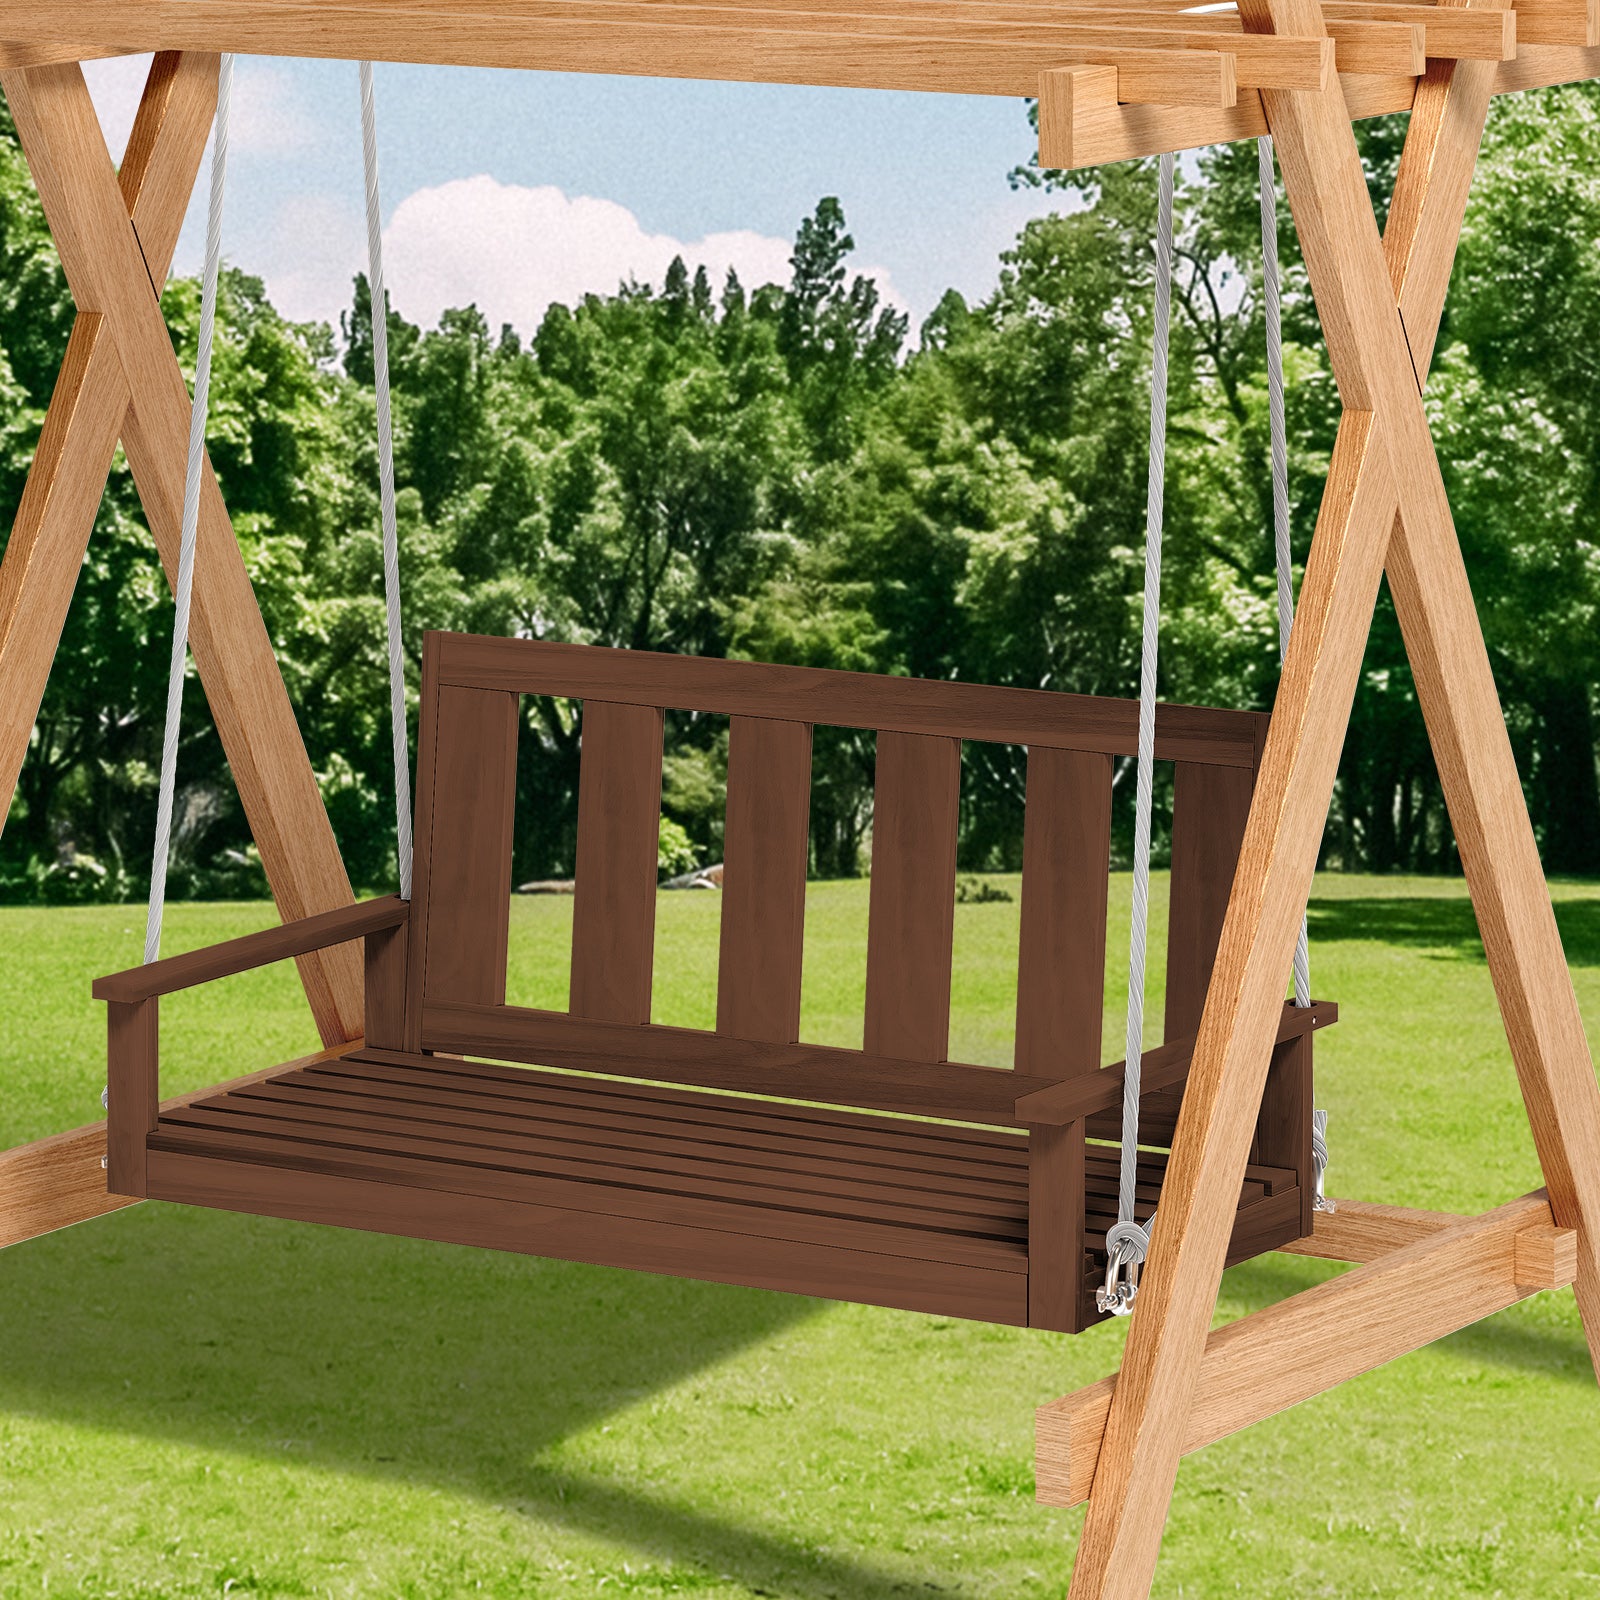 Mjkone Outdoor Wood Swing, Garden Swings with 2-3 Seat for Adults Kids, Large Tree Swing for Yard Patio Porch Garden, Hanging Bench Chair Furniture for Deck, 700LBS Weight Capacity